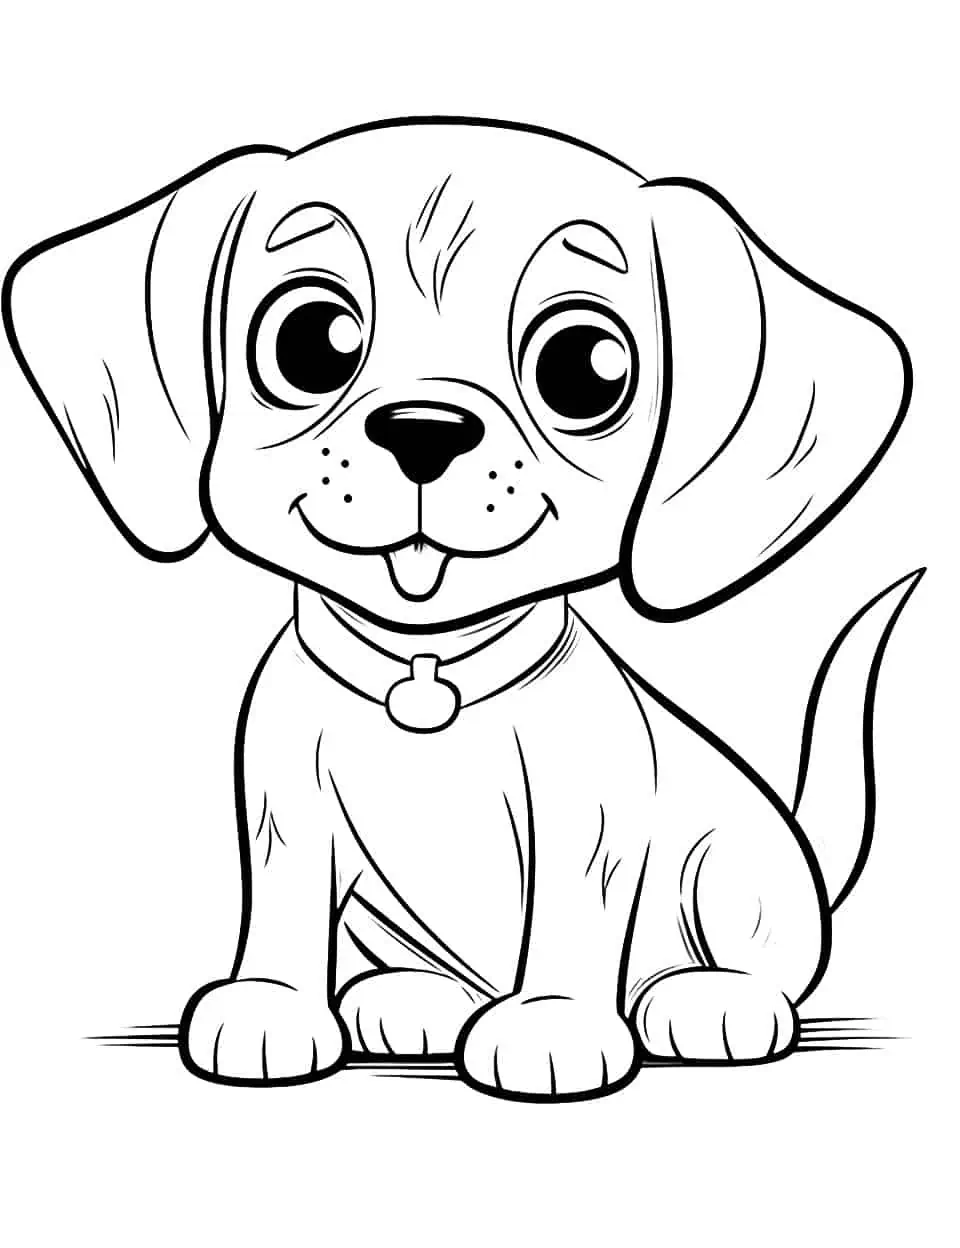 Kawaii Beagle Puppy Dog Coloring Page - A Beagle puppy drawn in a cute, kawaii style with big, lovable eyes.